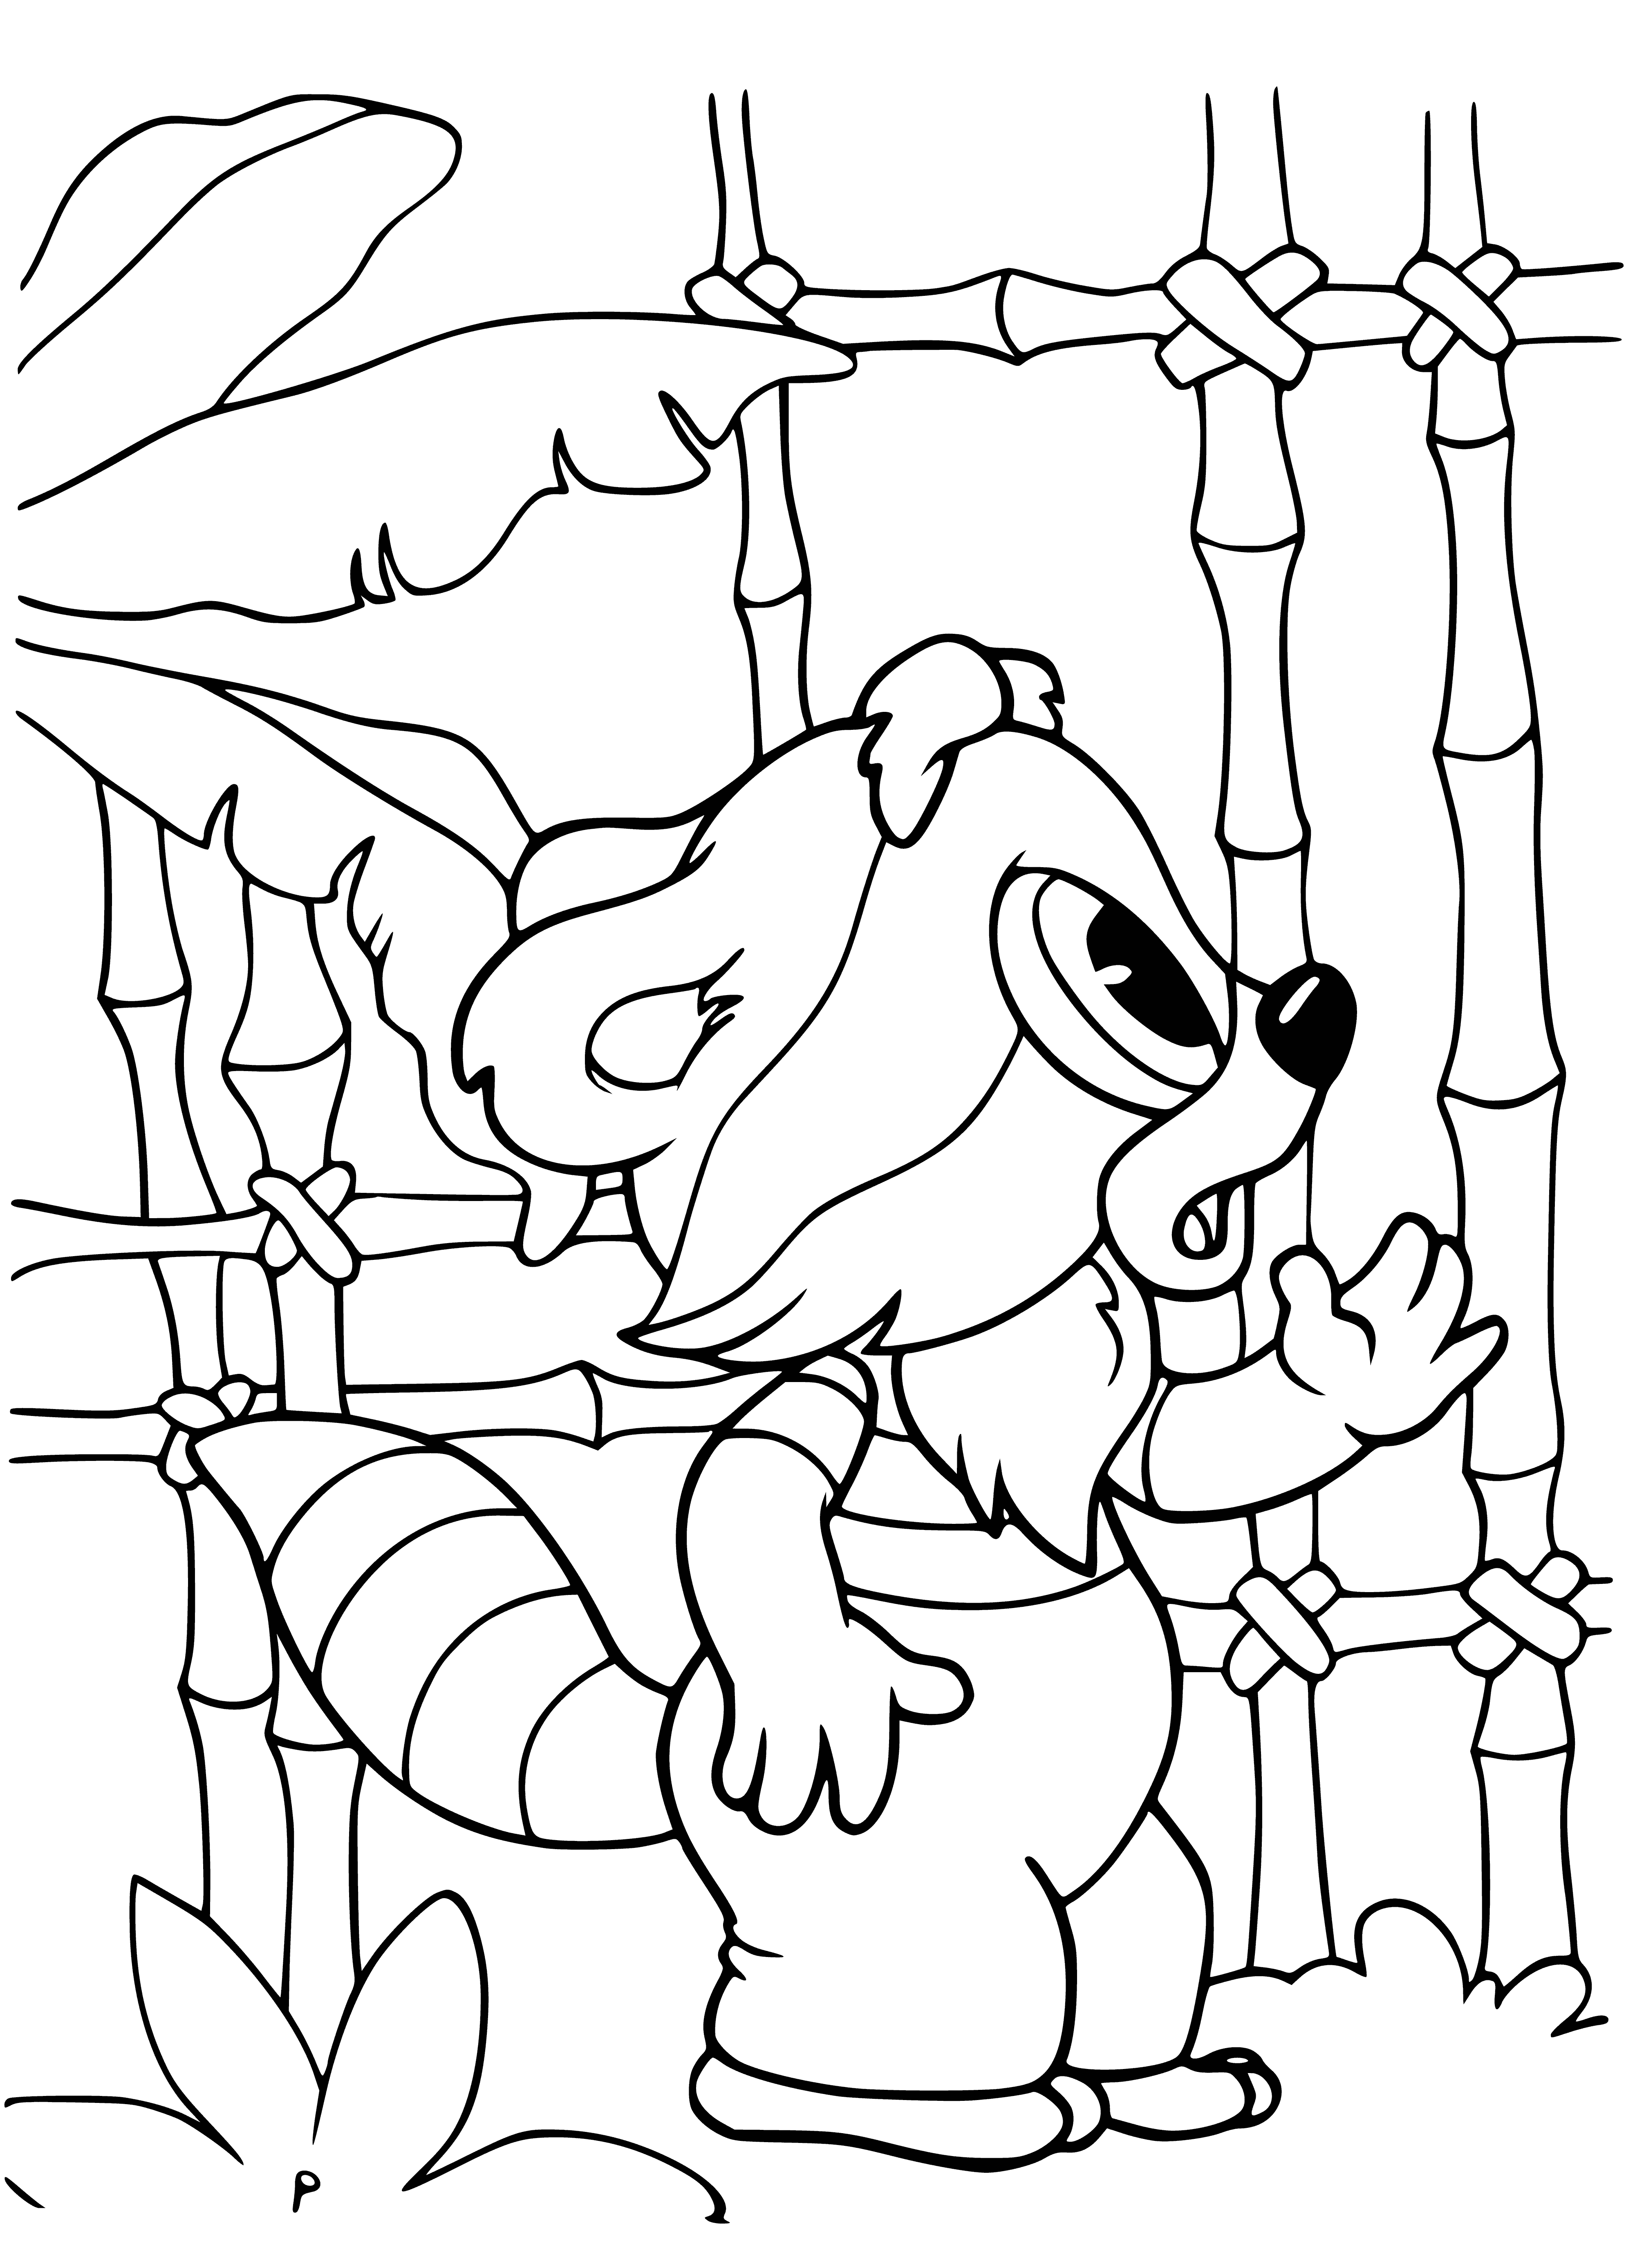 coloring page: Little raccoon stands on hind legs smiling, brown & white fur, long tail w/ black & white stripes.